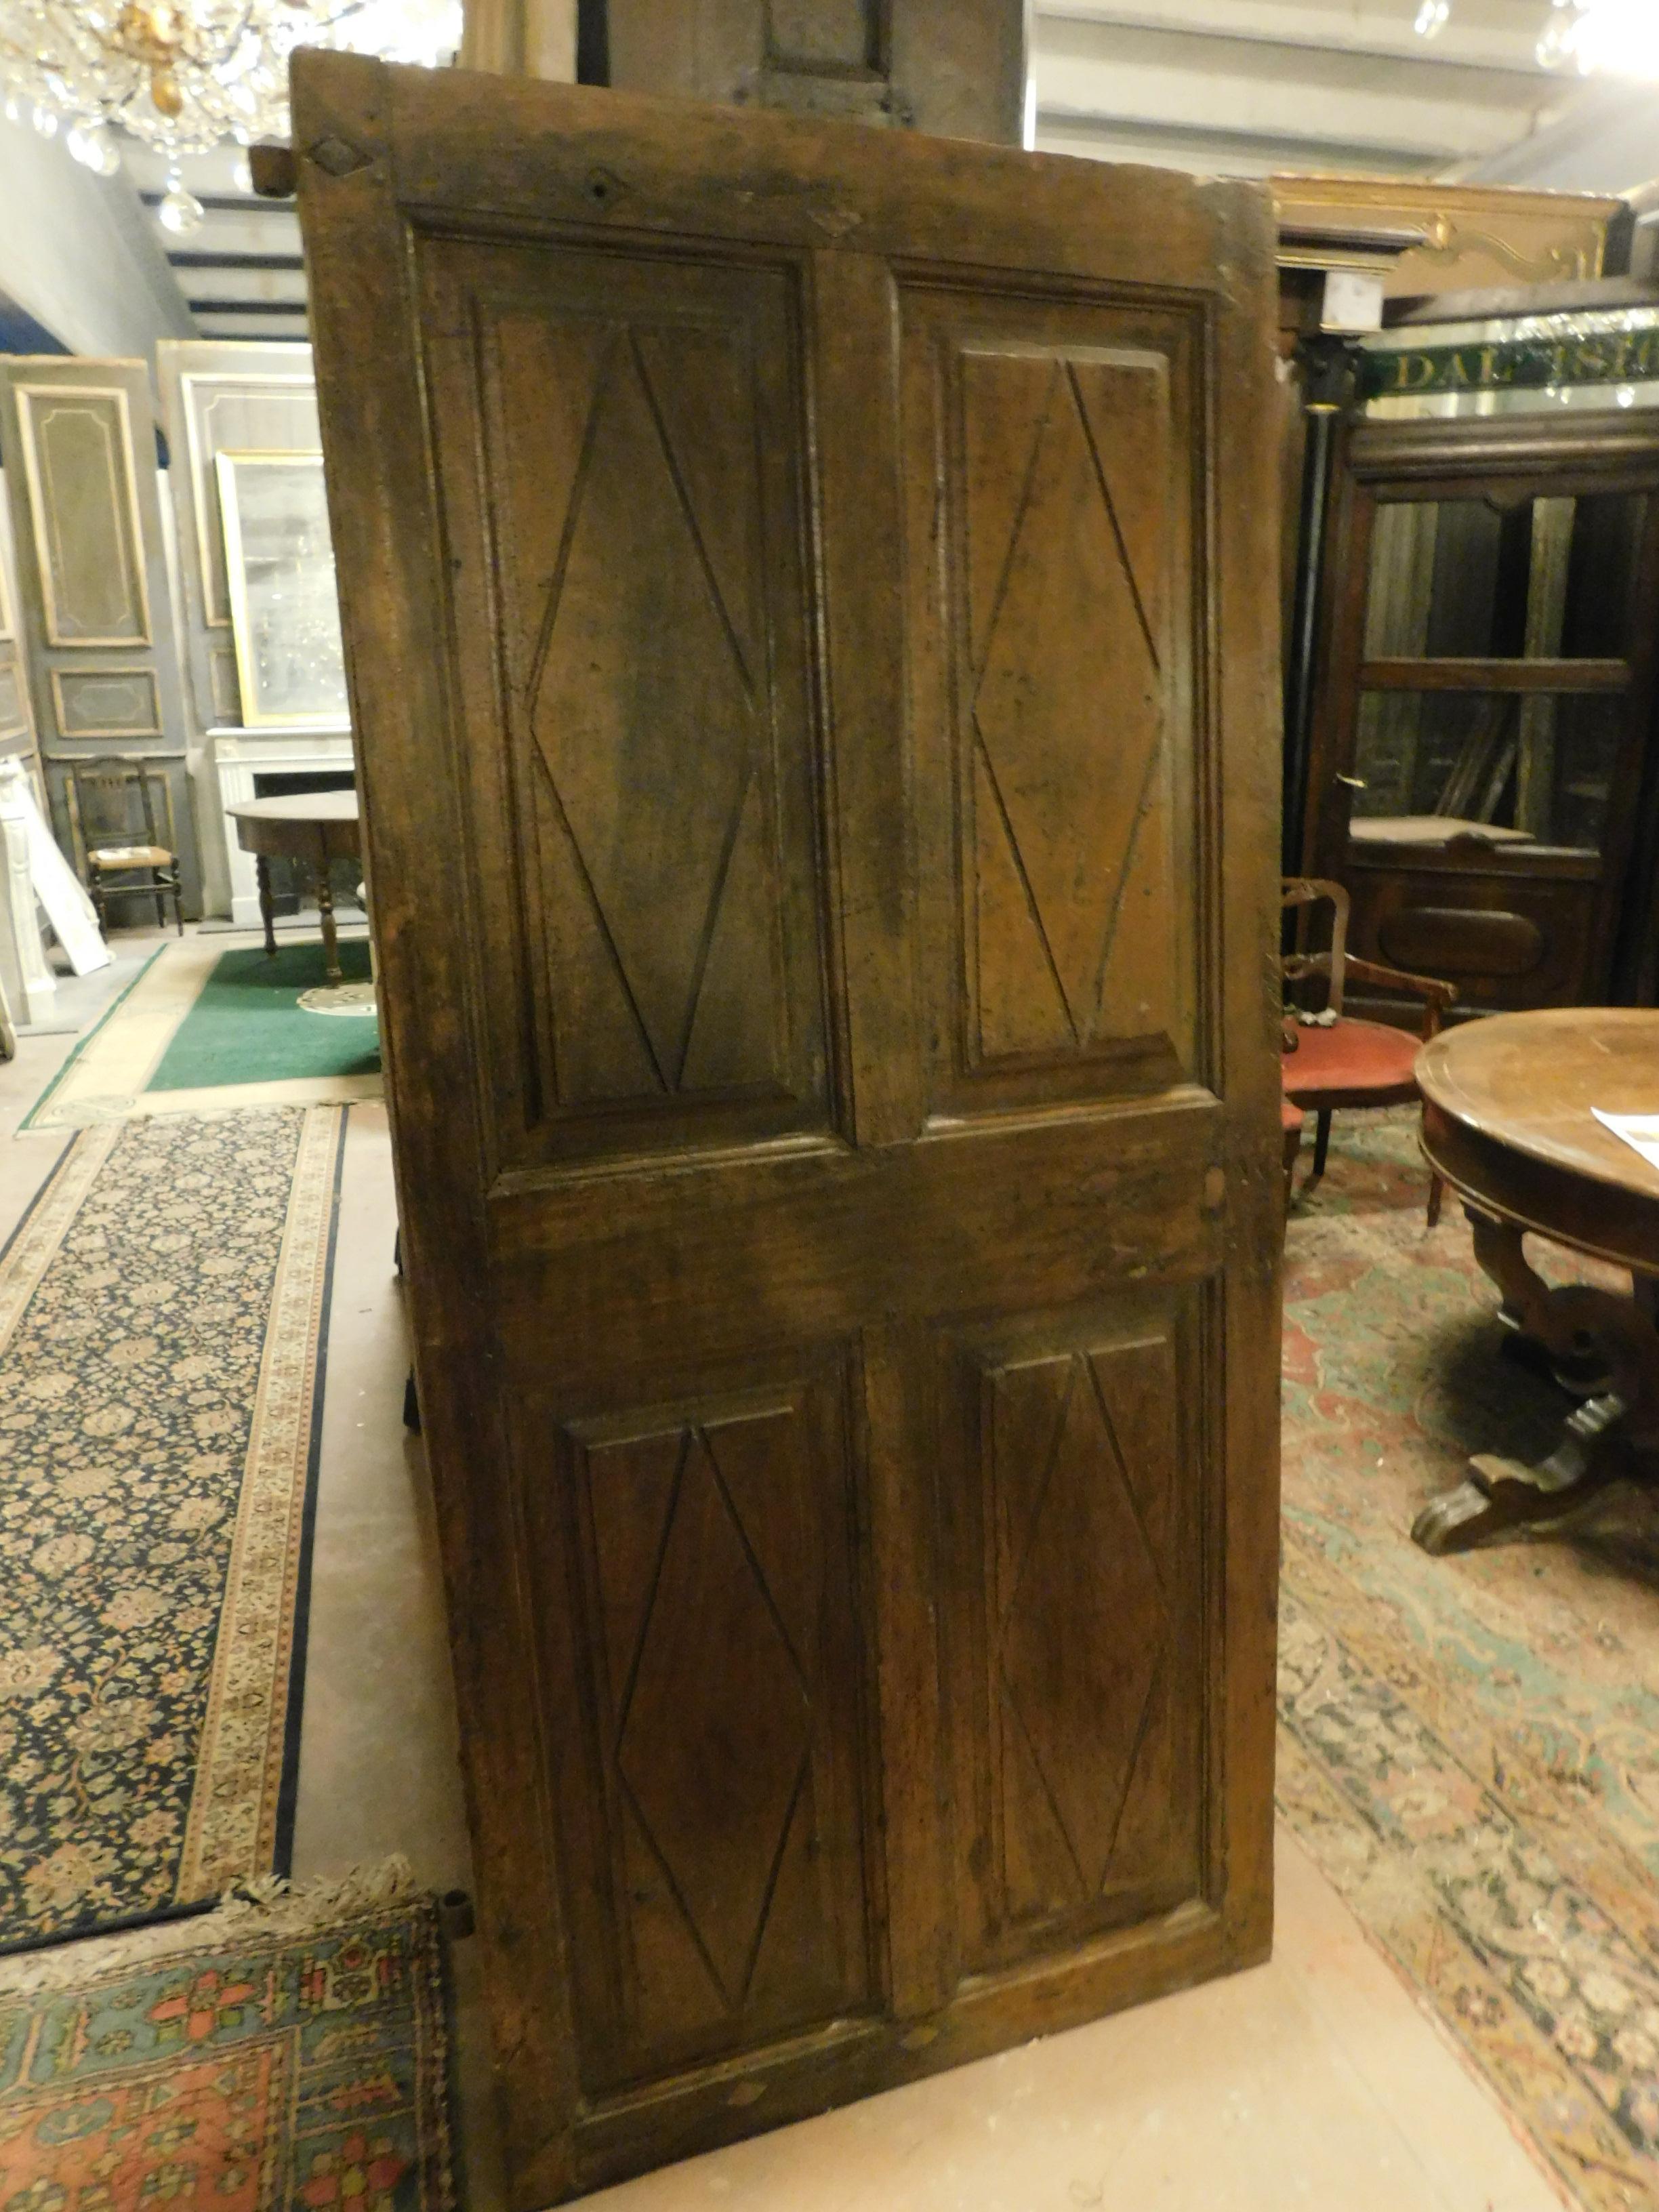 Ancient single door, hand-carved in precious solid walnut wood, patinated and sculpted with 4 panels with lozenges, Piedmontese origins, hand-built in the 18th century in Italy.
Measure cm w 91 x h 193 x t 3.5.